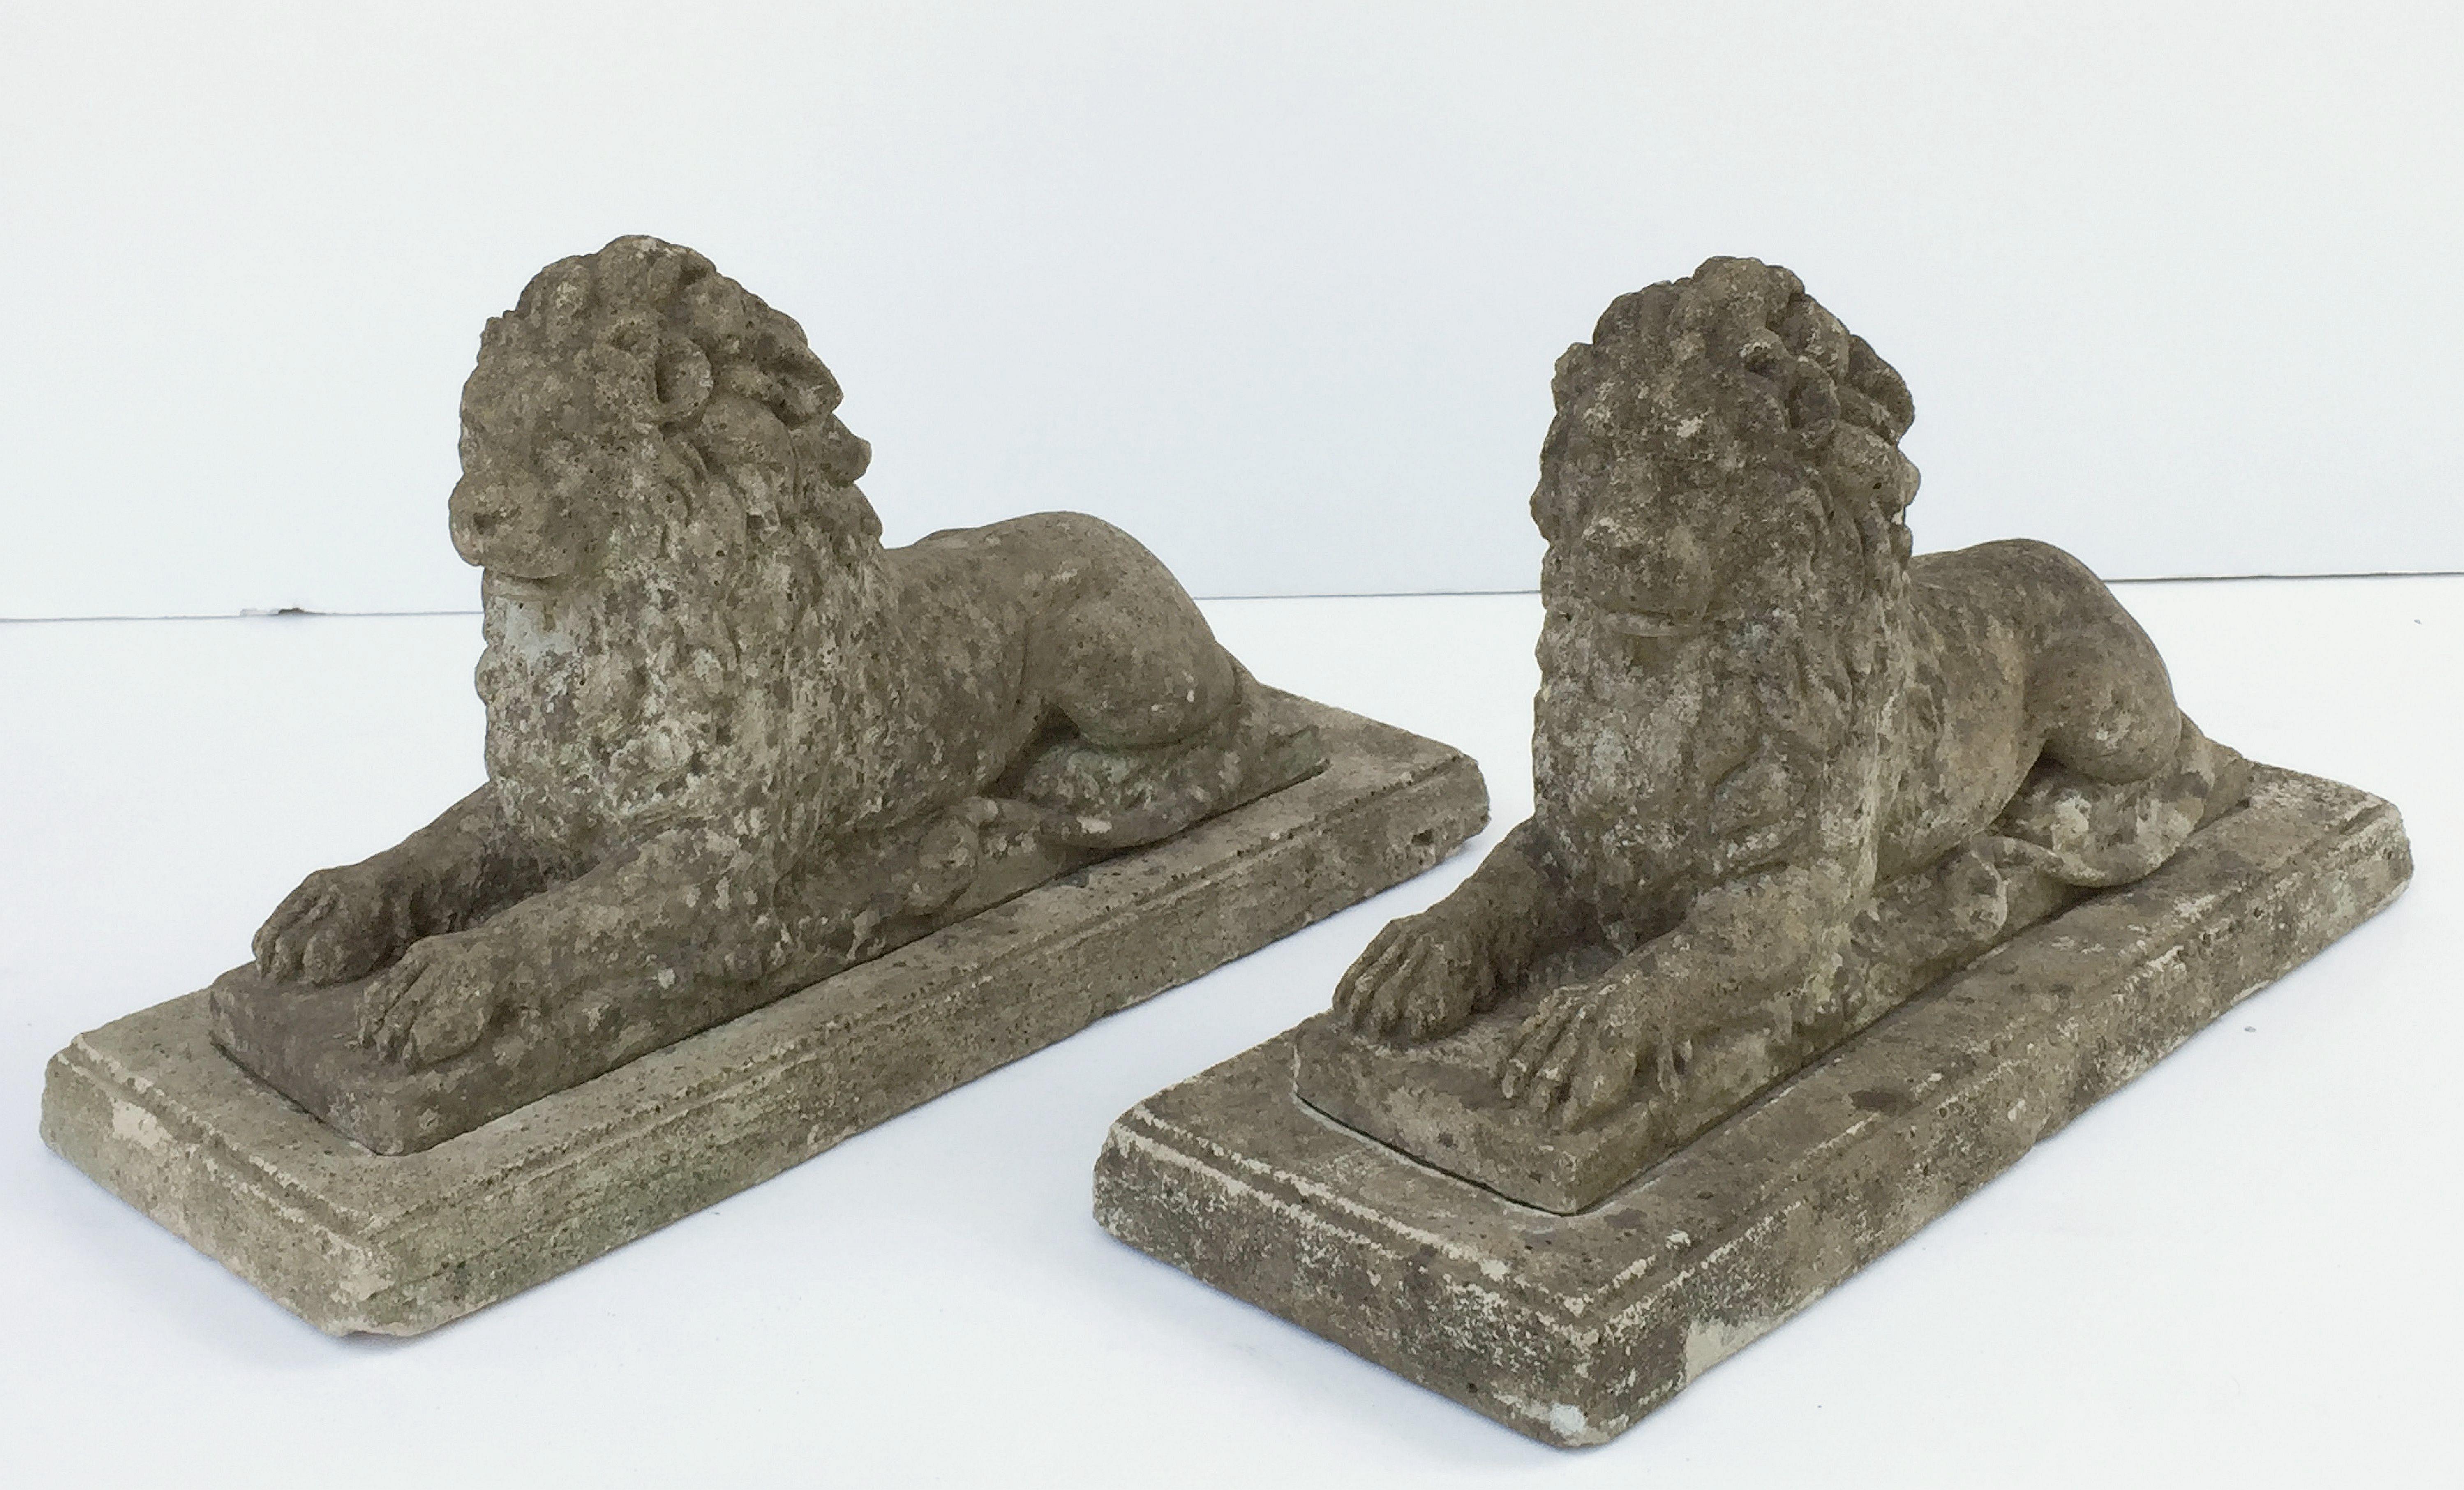 A fine pair of English garden lions of composition stone, in a recumbent pose - each lion featuring fine detail modeling, set upon a fitted, recessed rectangular base or plinth.

Dimensions of each lion: H 13 1/2 inches x W 23 inches x D 9